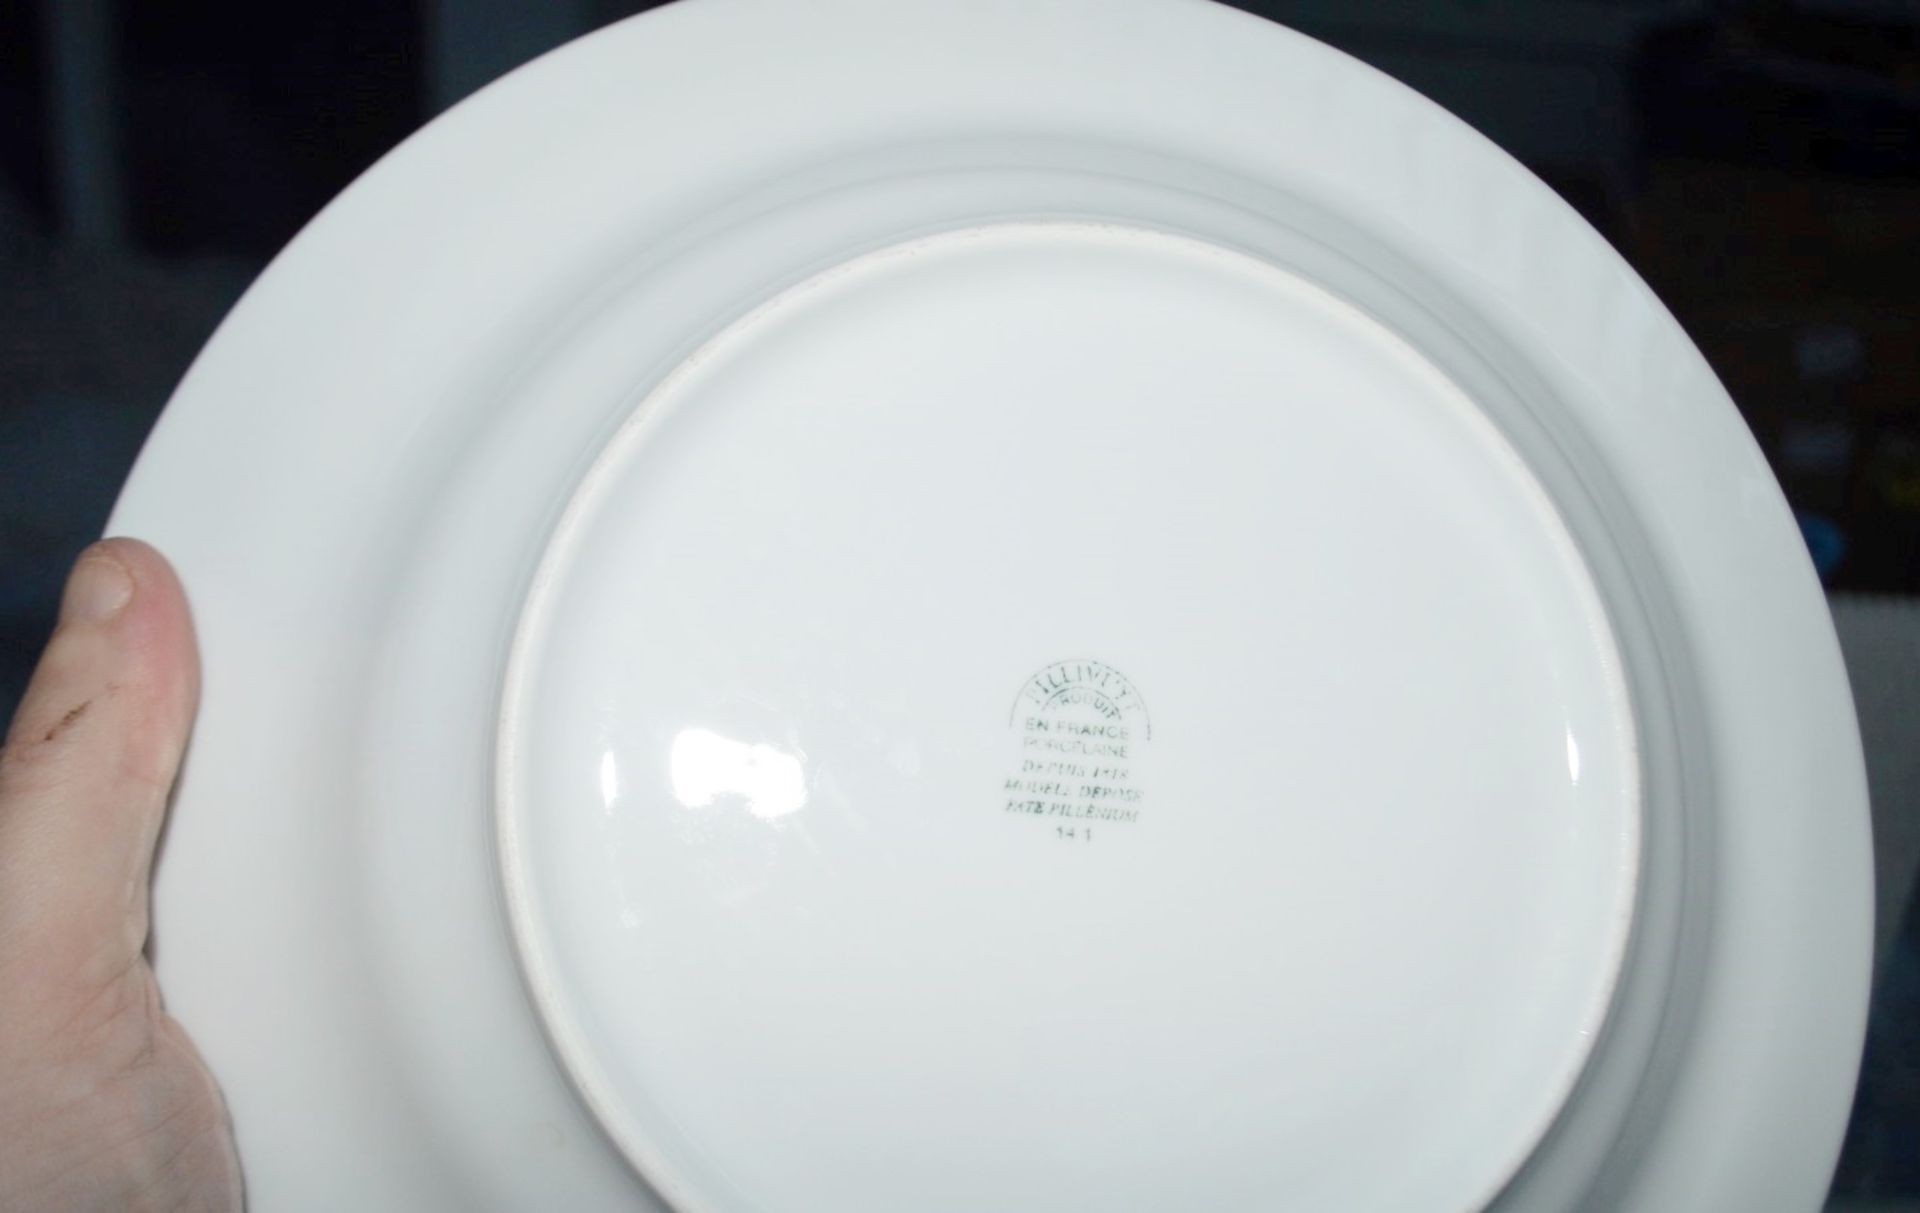 12 x PILLIVUYT 27cm Porcelain Pasta / Soup Plates In White Featuring 'Famous Branding' In Gold - Image 5 of 5